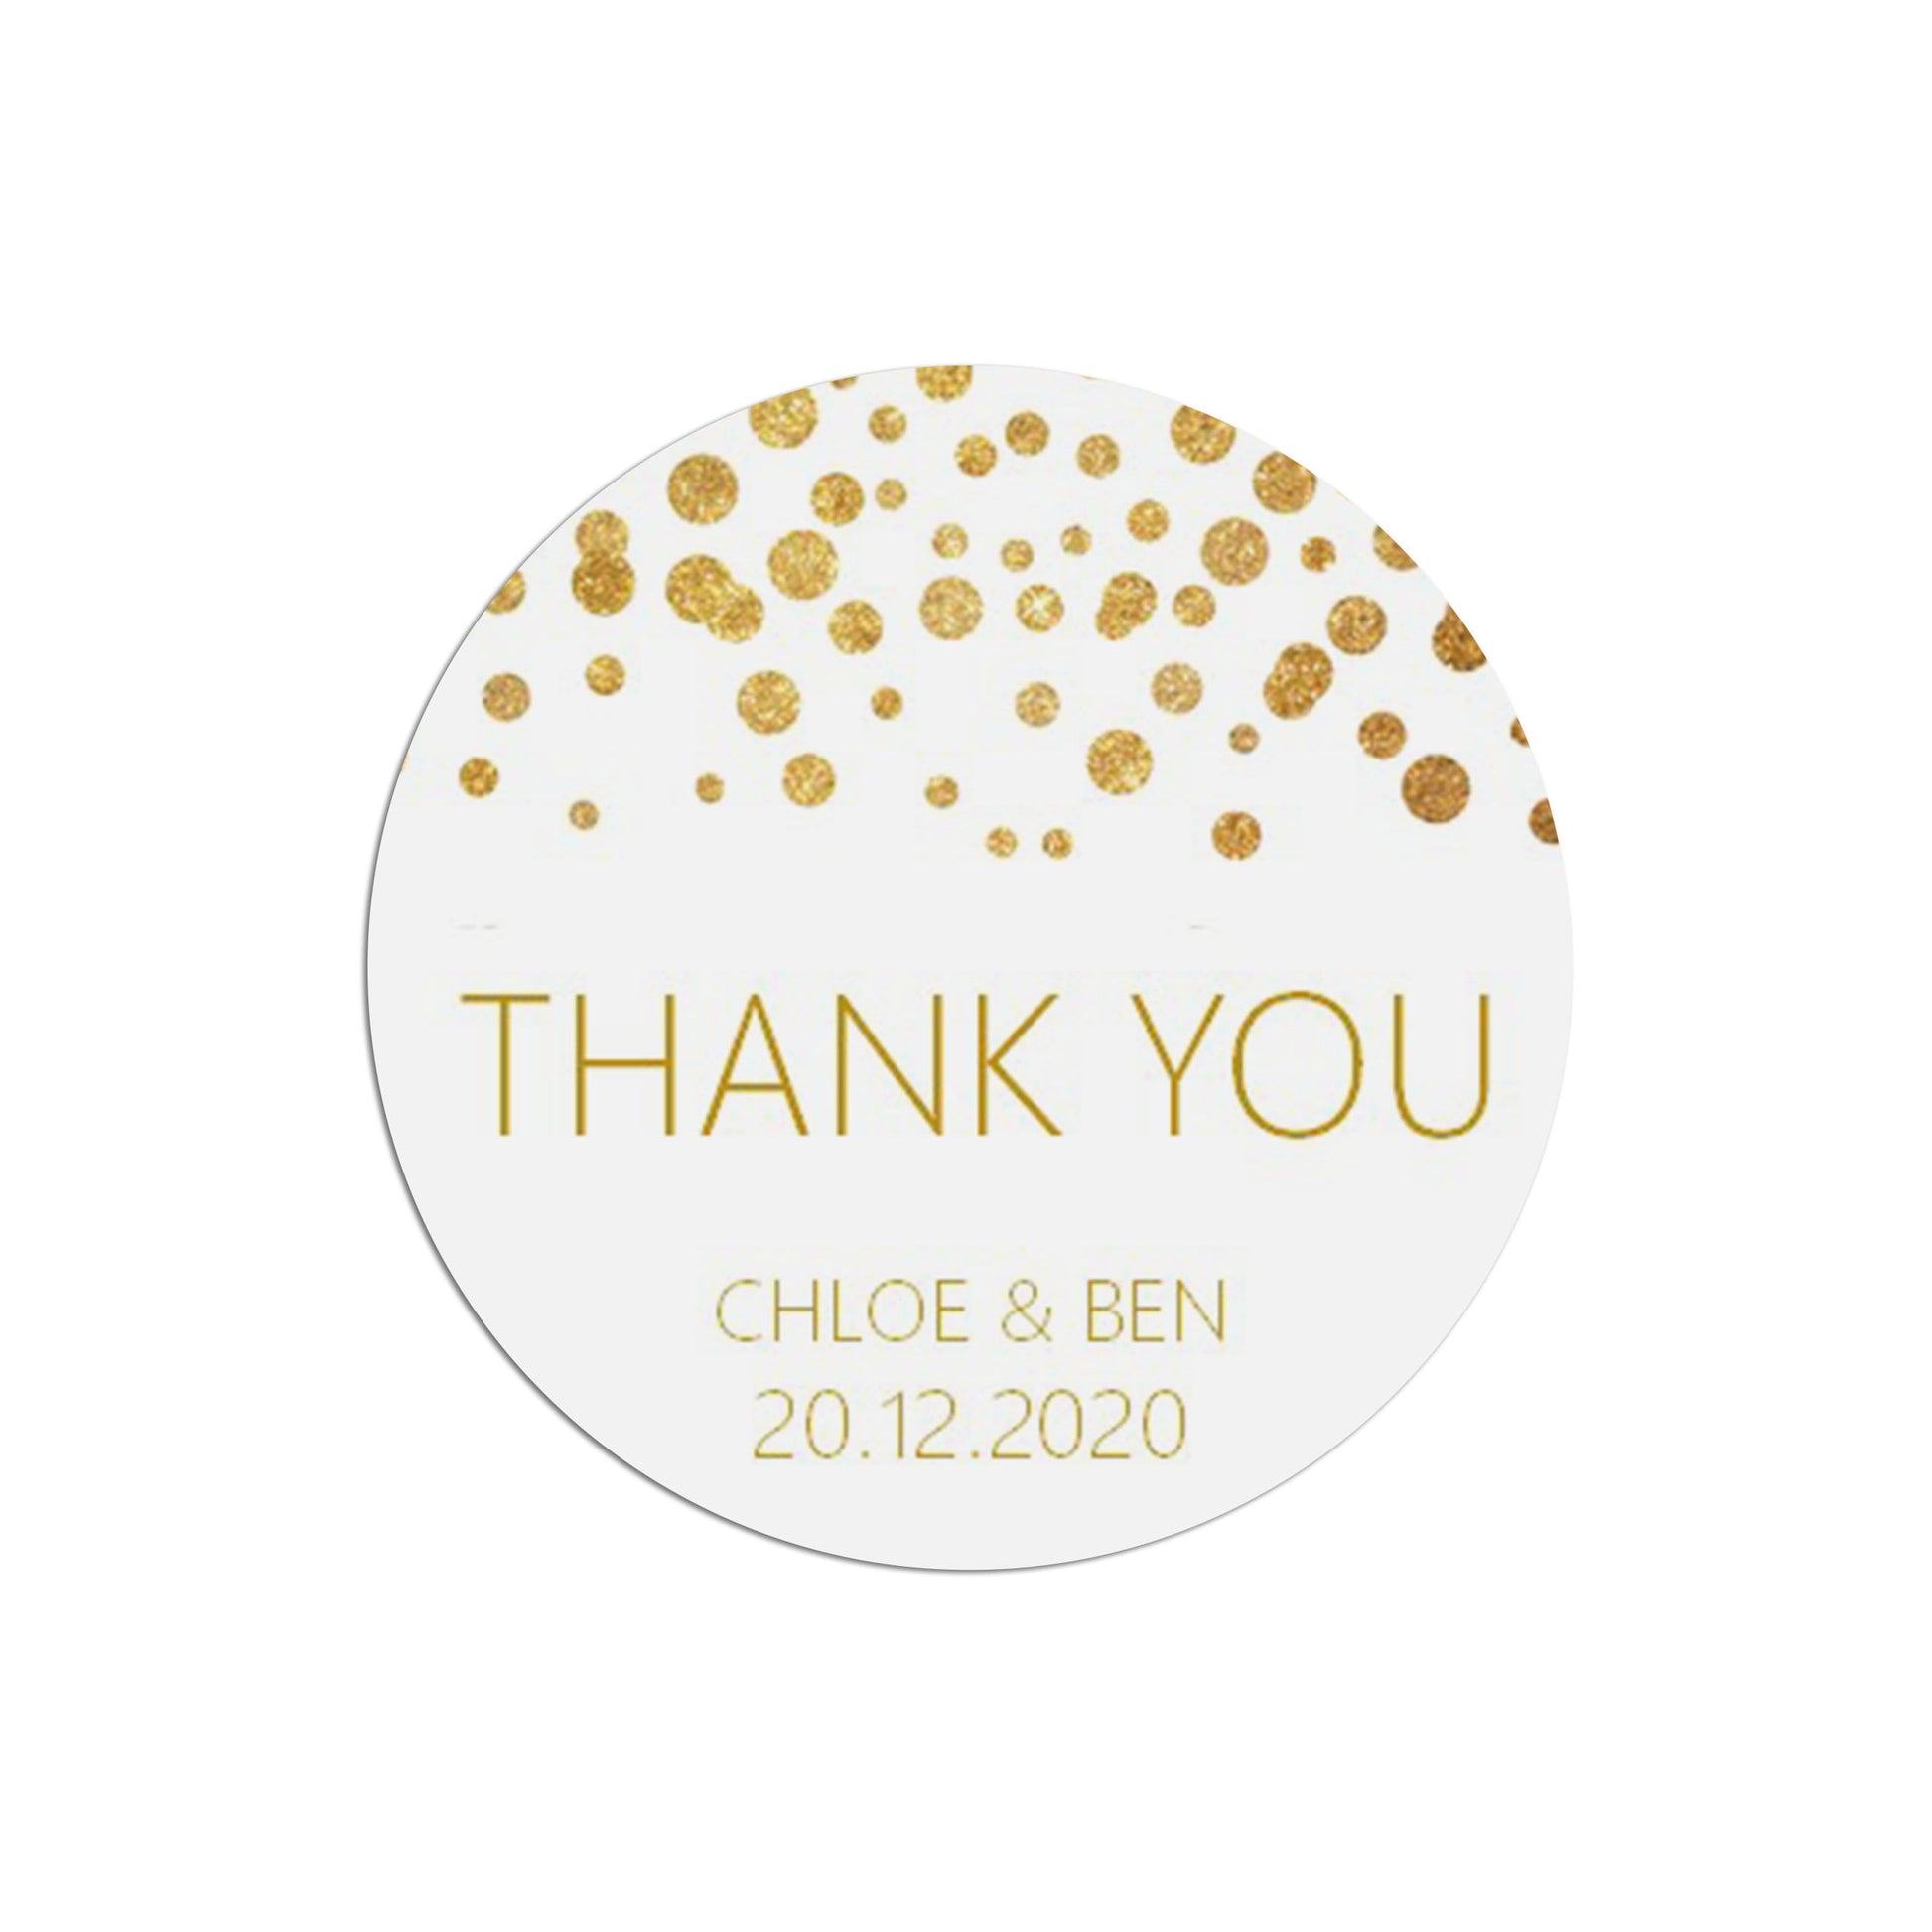 Thank You Wedding Stickers, Gold Effect 37mm Round Personalised x 35 Stickers Per Sheet